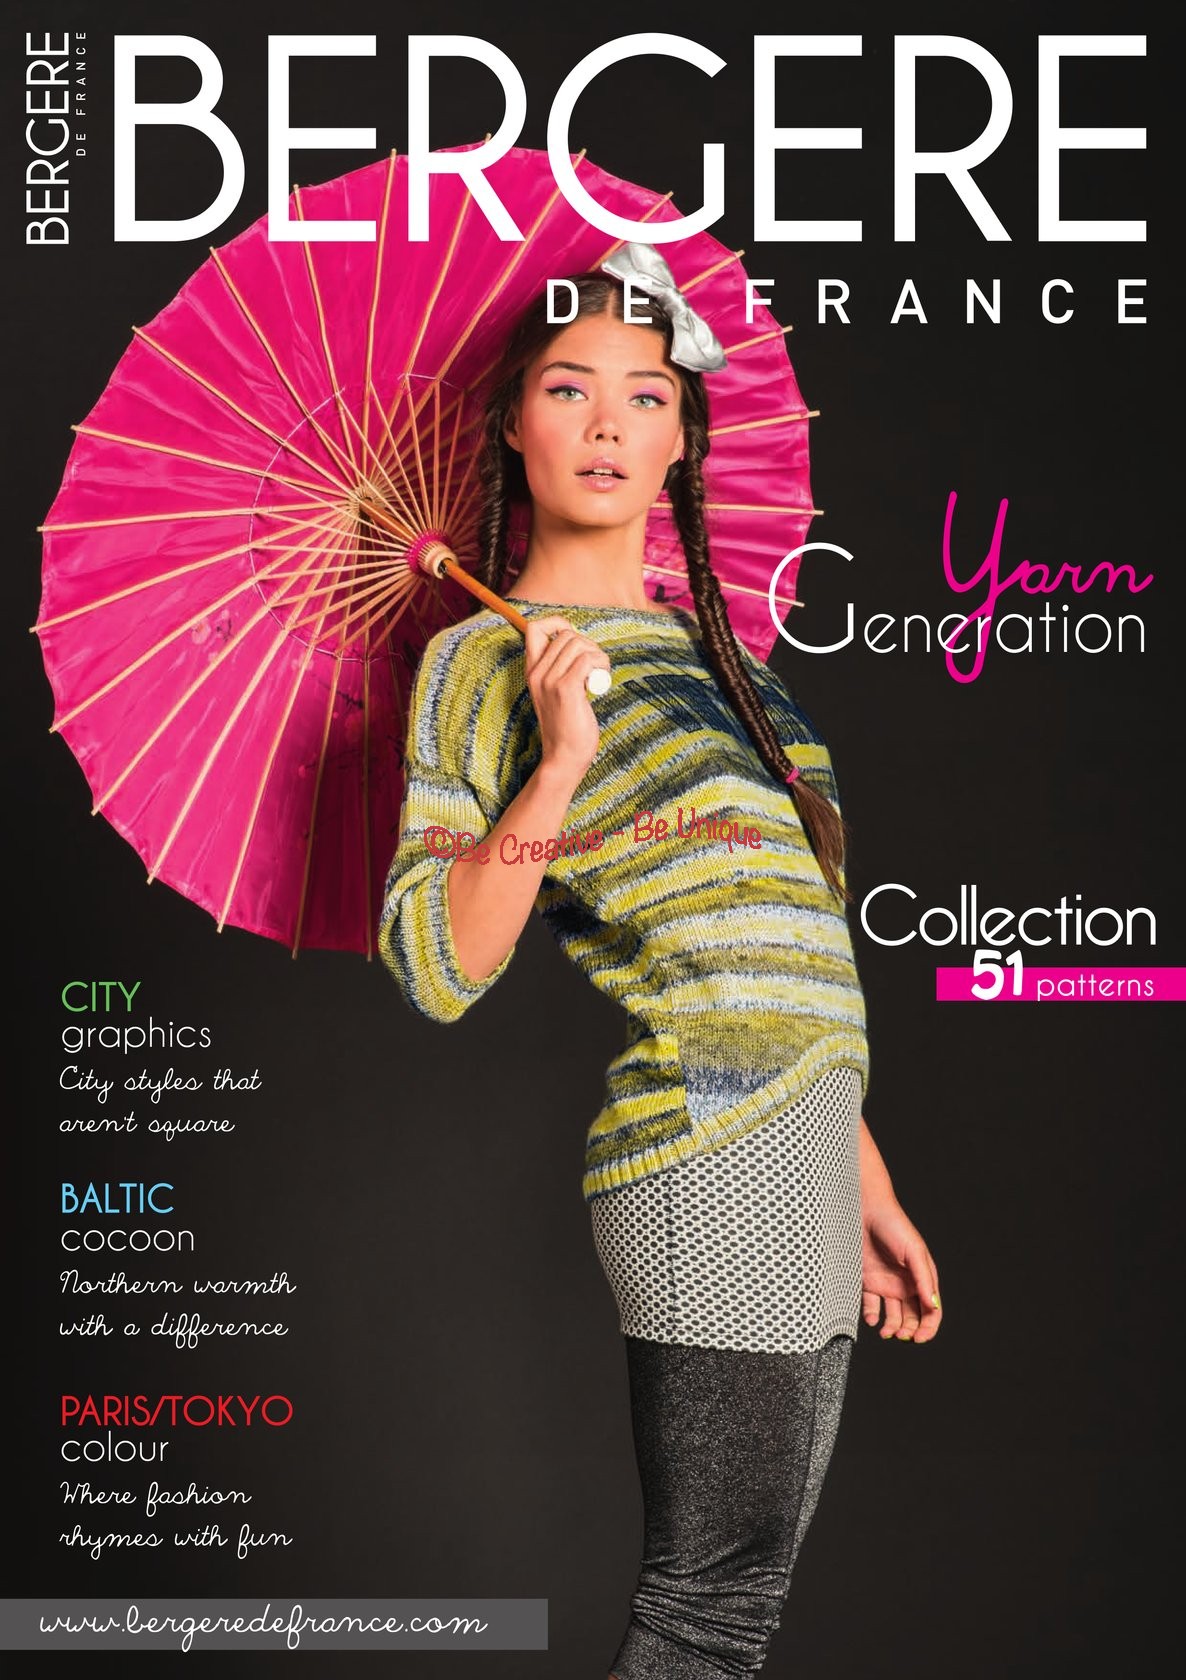 Bergere de France - Mag 169 - Yarn Generation - Patterns In English